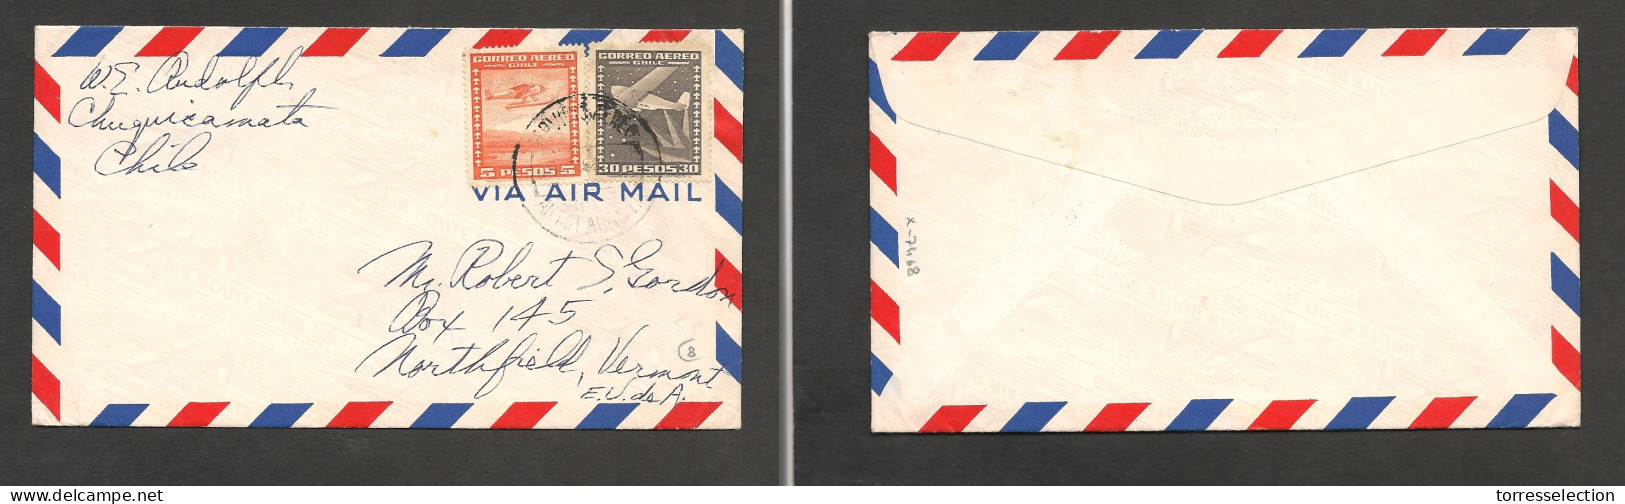 CHILE. Chile - Cover - 1956 3 Apr Antofagasta To USA Northfield Vermont Air Mult Fkd Env At 35$ Rate, Fine. Ex-Prof West - Chili